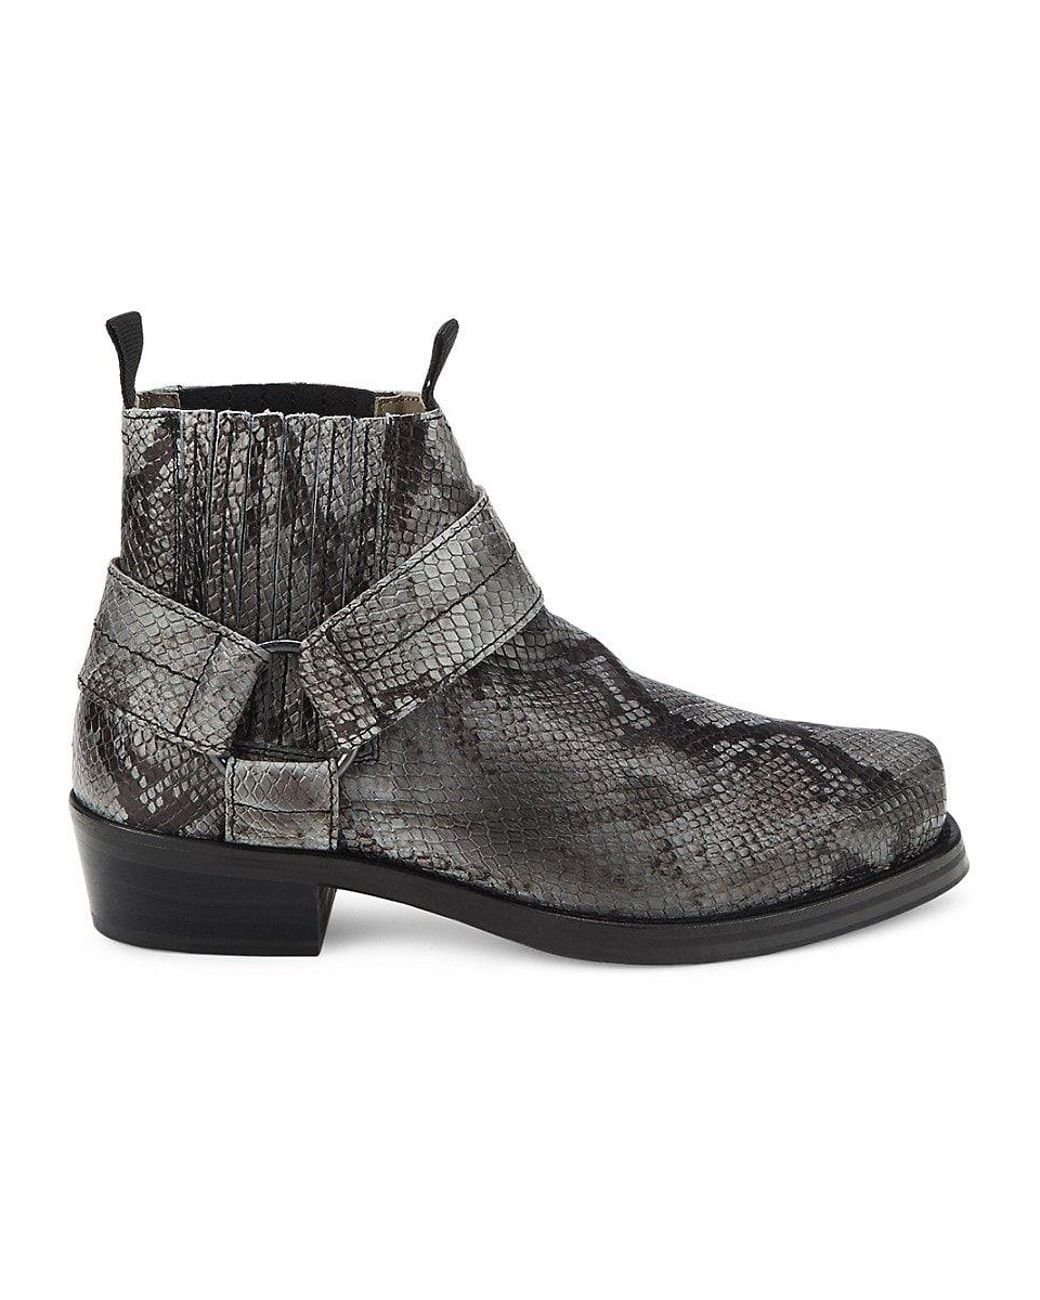 AllSaints Abbot Snakeskin Print Embossed Leather Ankle Boots in Black |